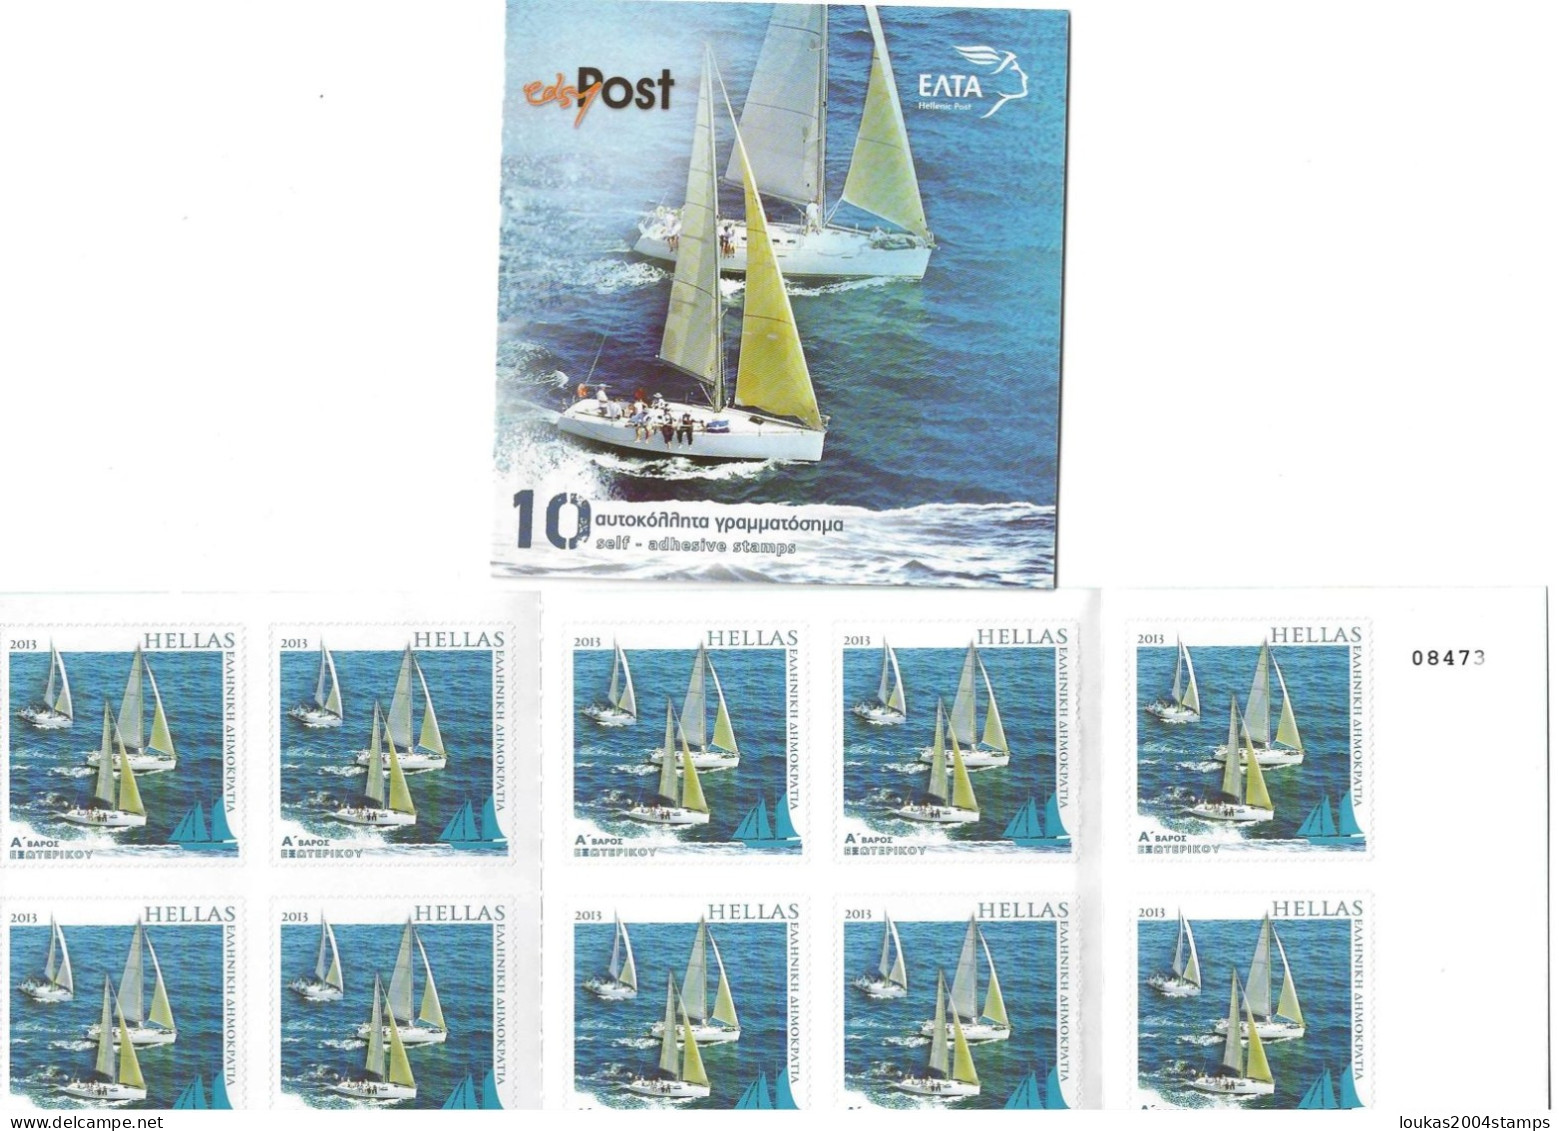 GREECE  2013    BOOKLET    SELF - ADHESIVE   STAMPS    SAILING  TOURISM  [  WITH  NUMBER  ] - Postzegelboekjes